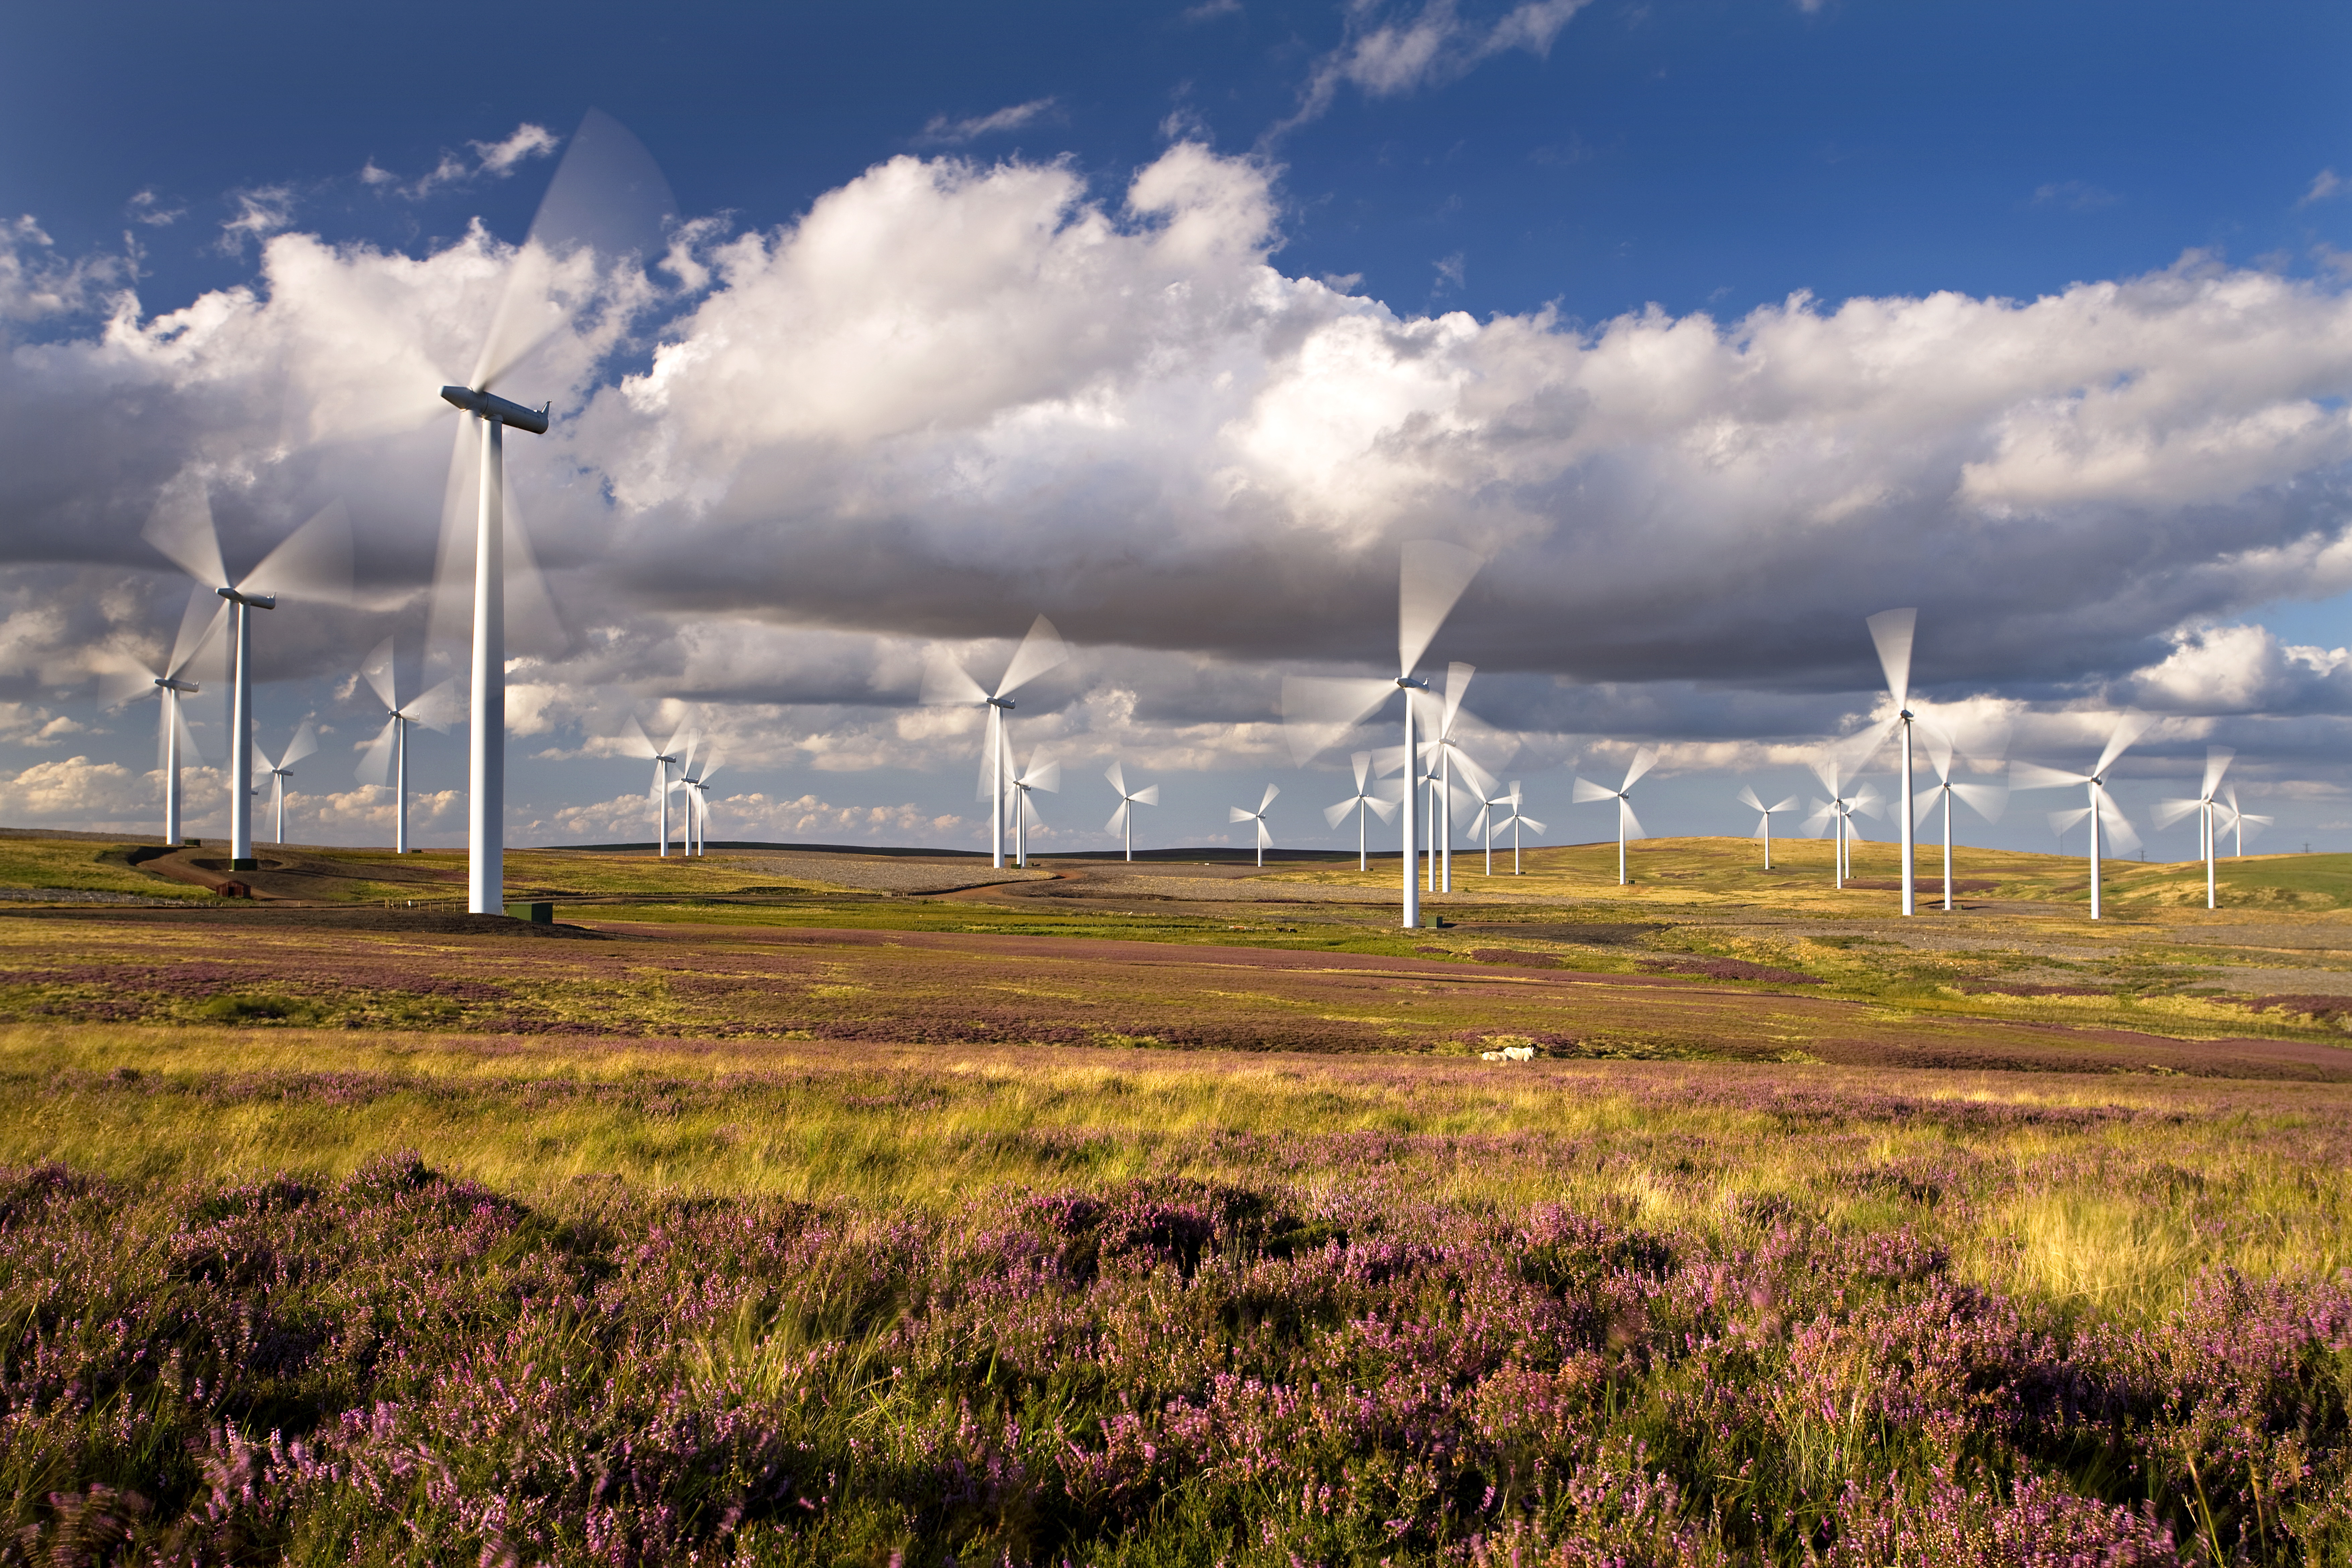 Develop a windfarm in forestry